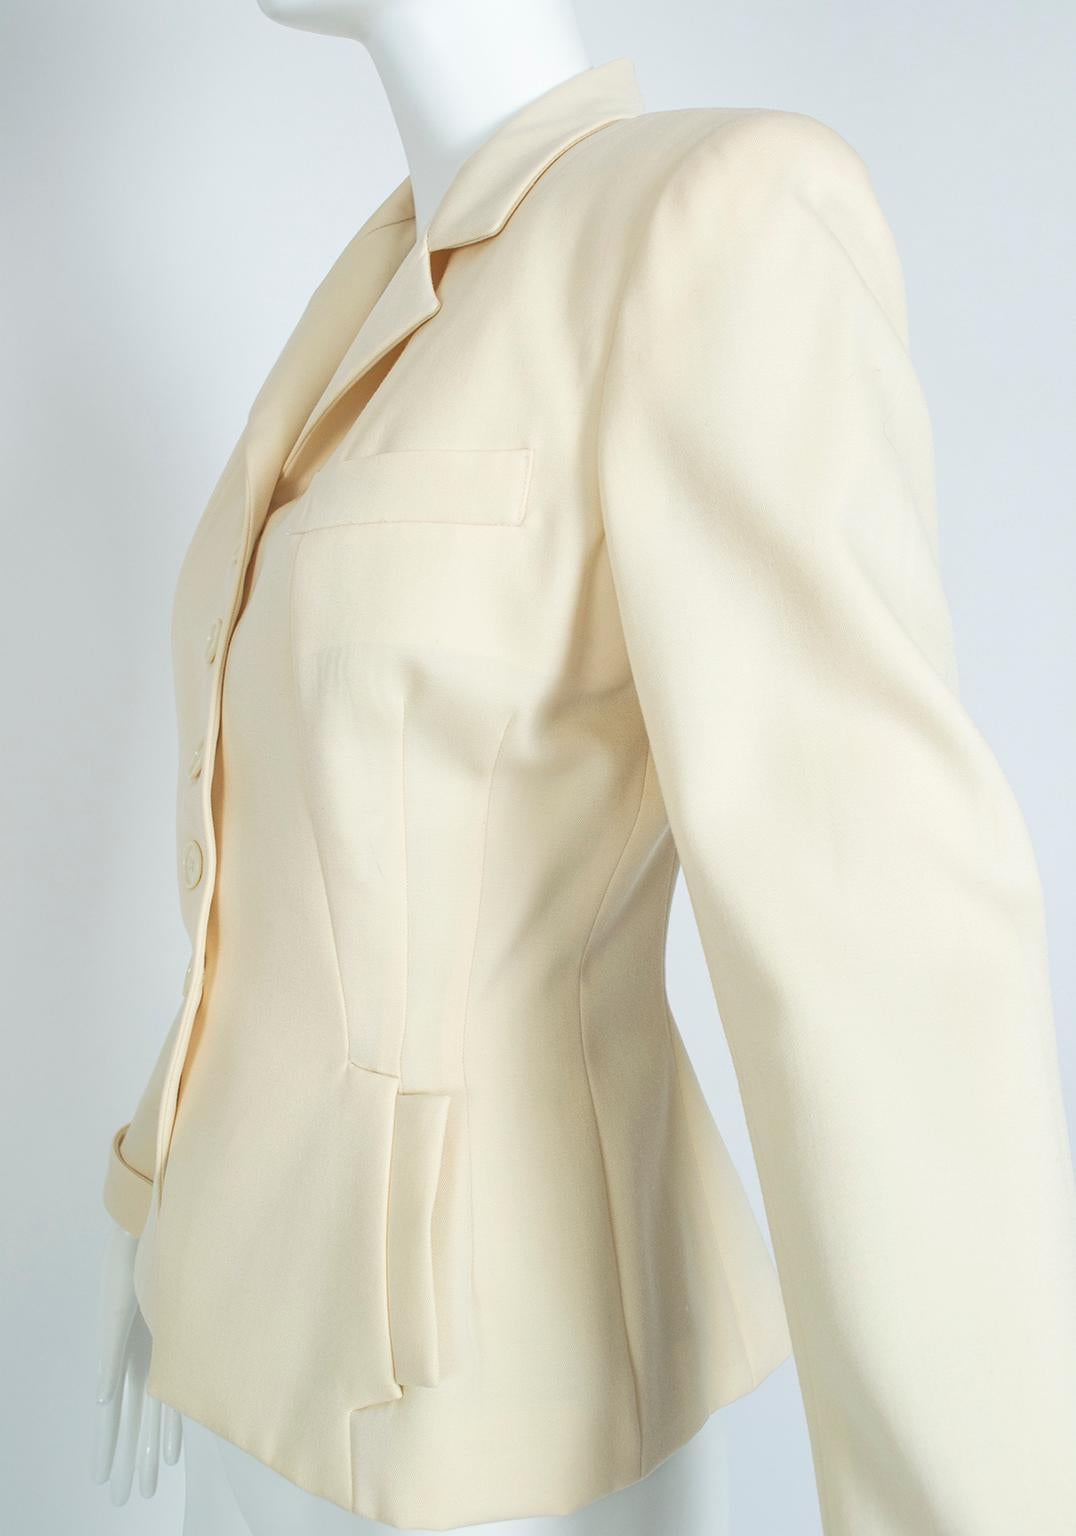 Norma Kamali Ivory Wool Dioresque Sculpted Bar Jacket Peplum Blazer - XS, 1980s In Excellent Condition In Tucson, AZ